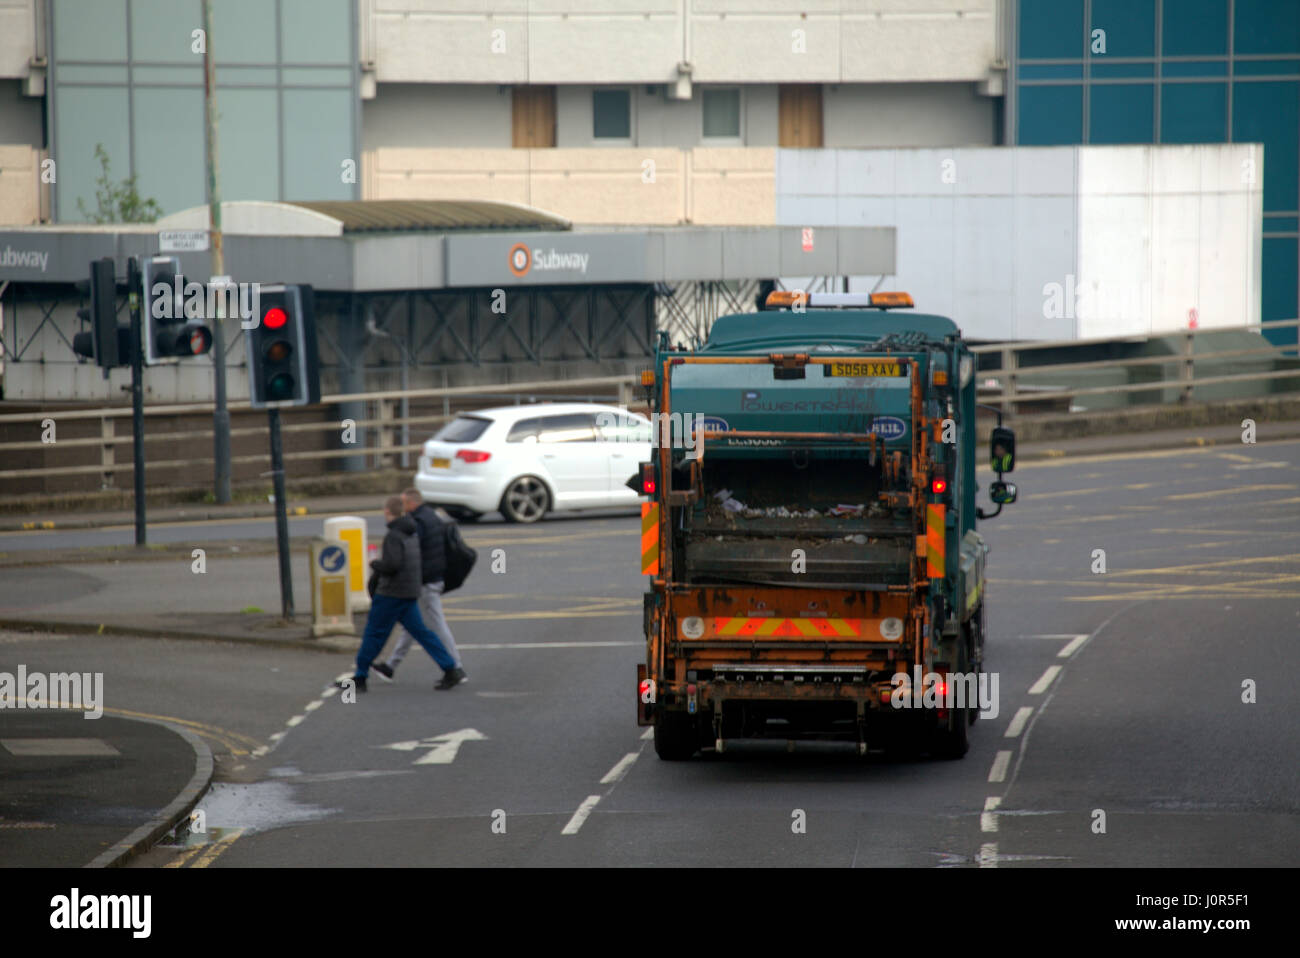 bin lorry rear view back  on the street showing rubbish disposal entrance and mechanism garbage or litter Stock Photo